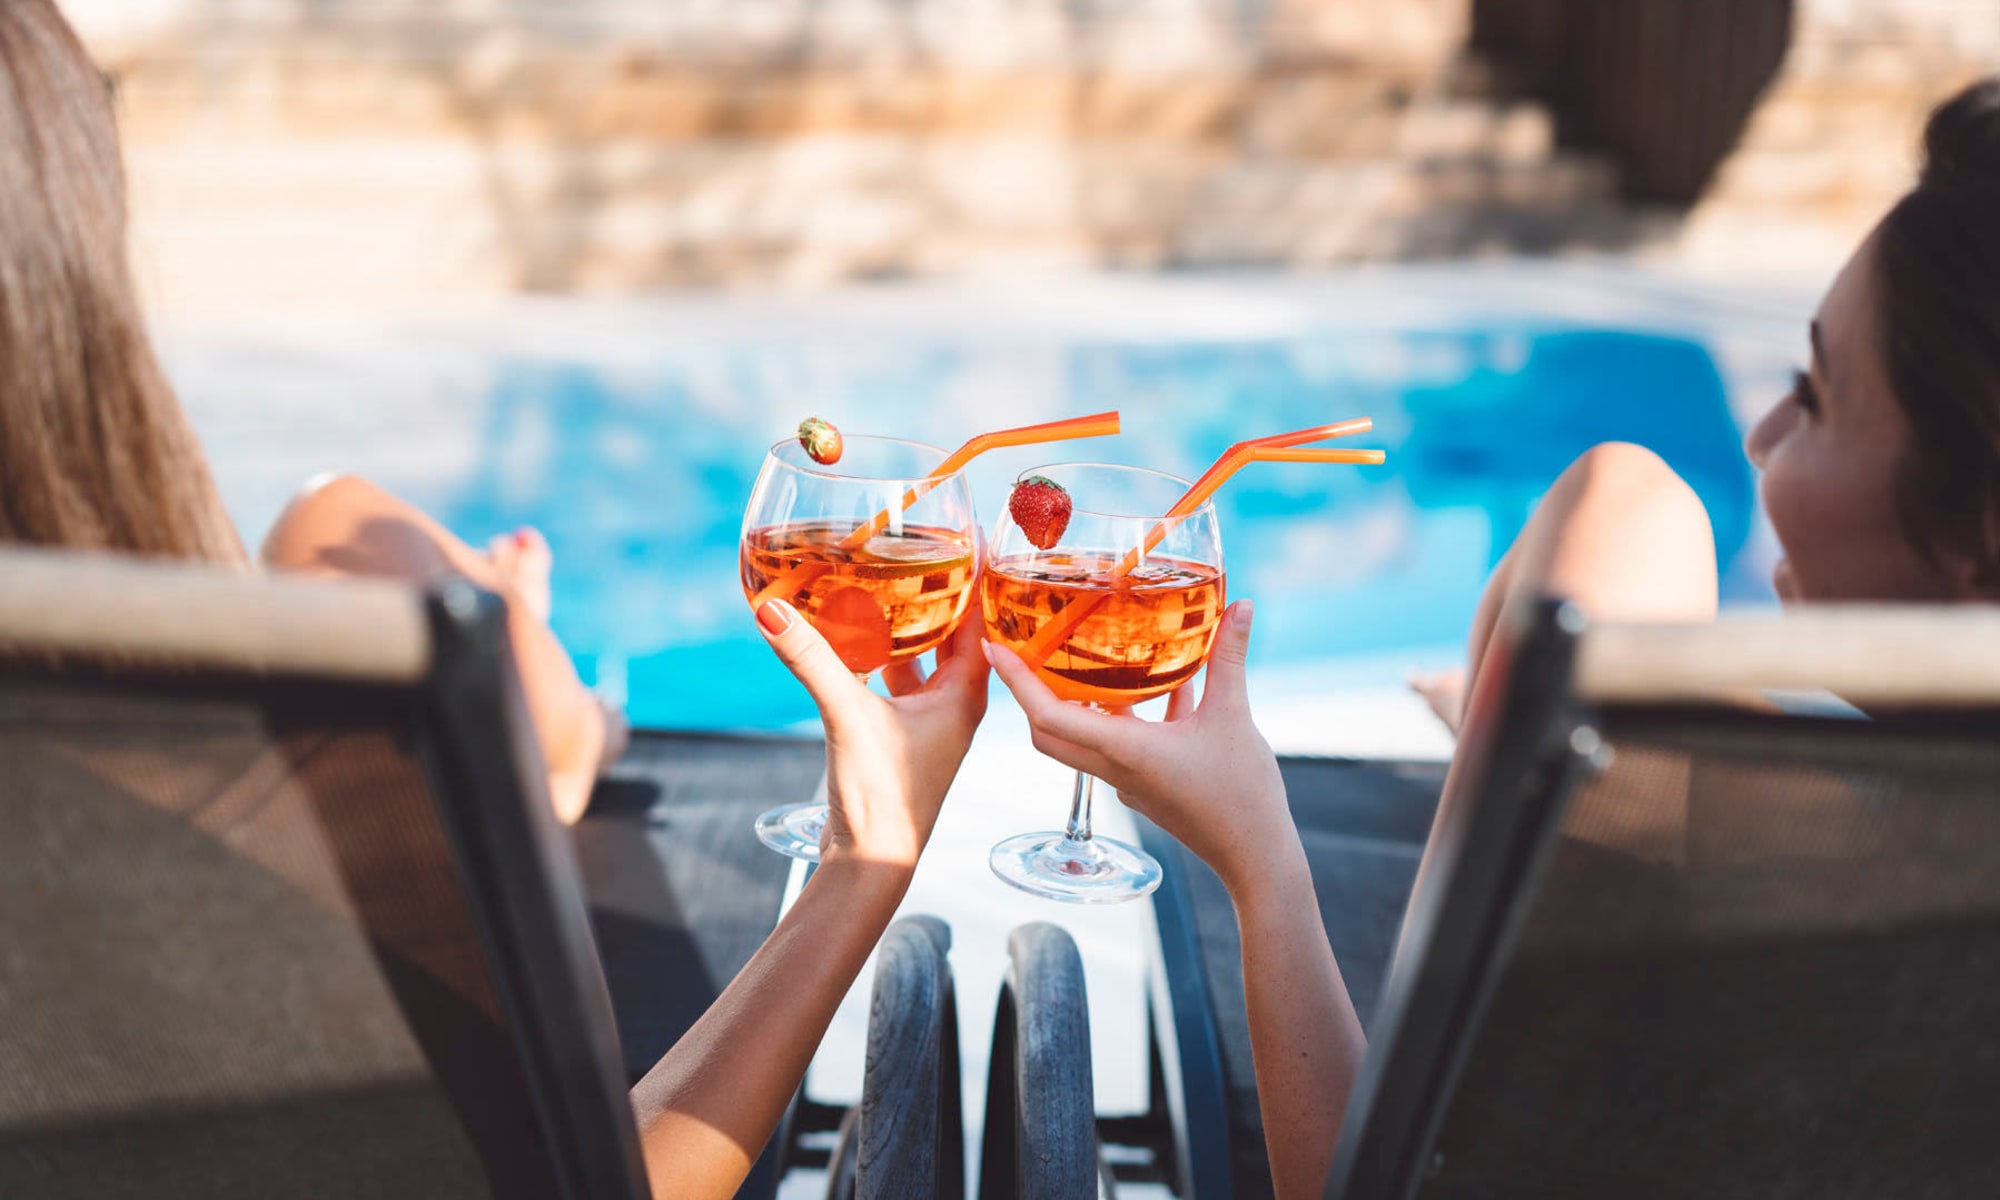 Residents have a poolside cocktail at Quintana at Cooley Station in Gilbert, Arizona